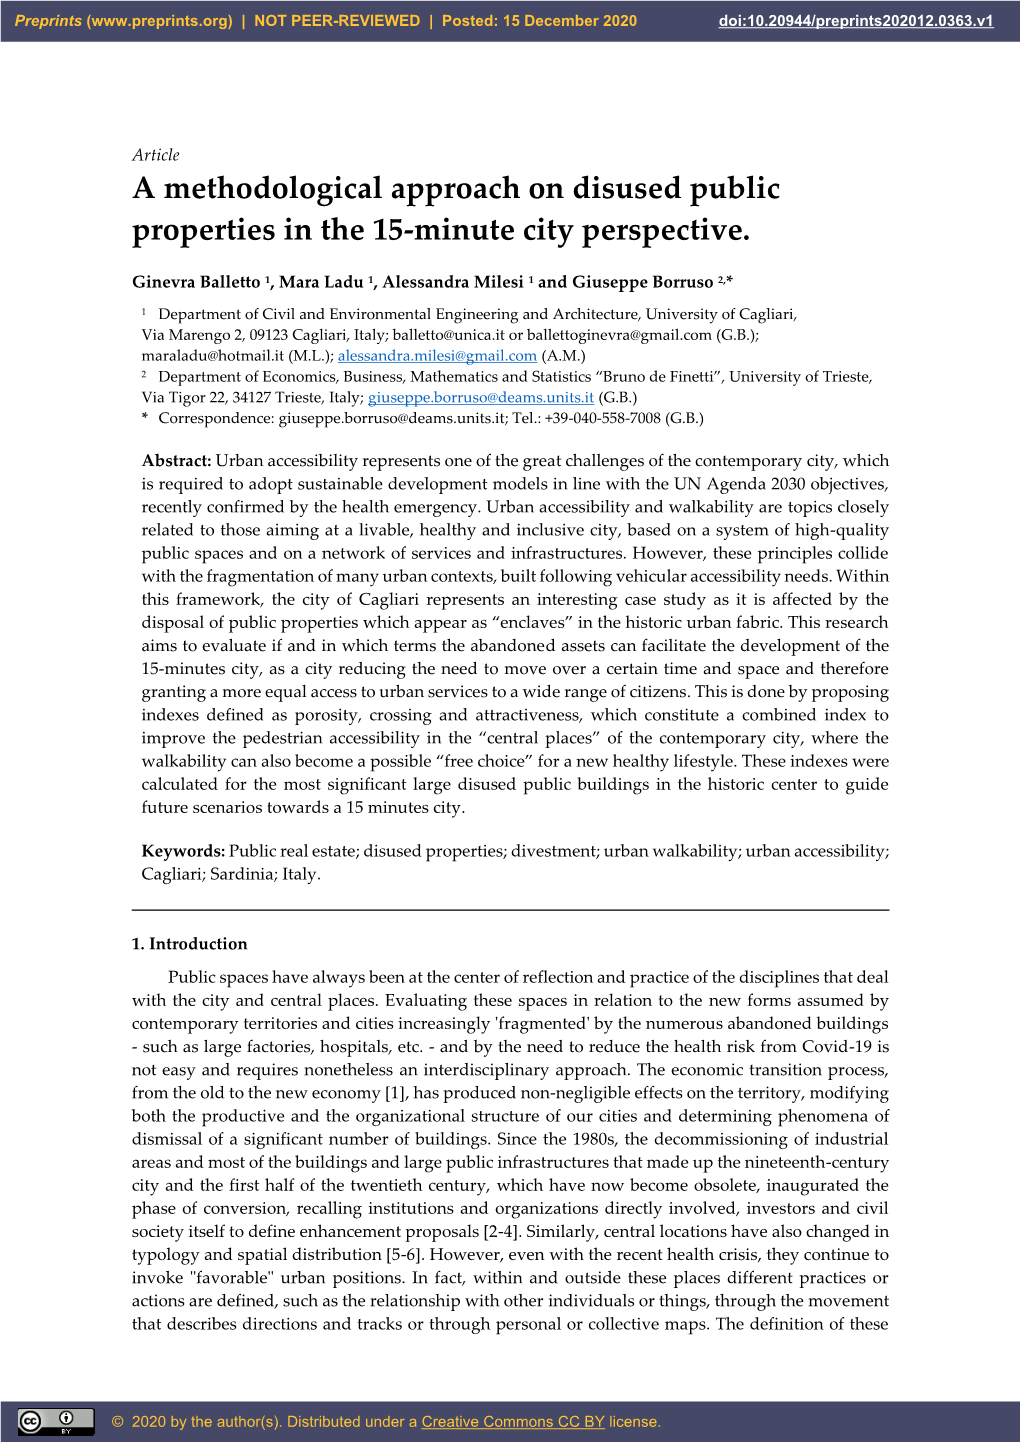 A Methodological Approach on Disused Public Properties in the 15-Minute City Perspective